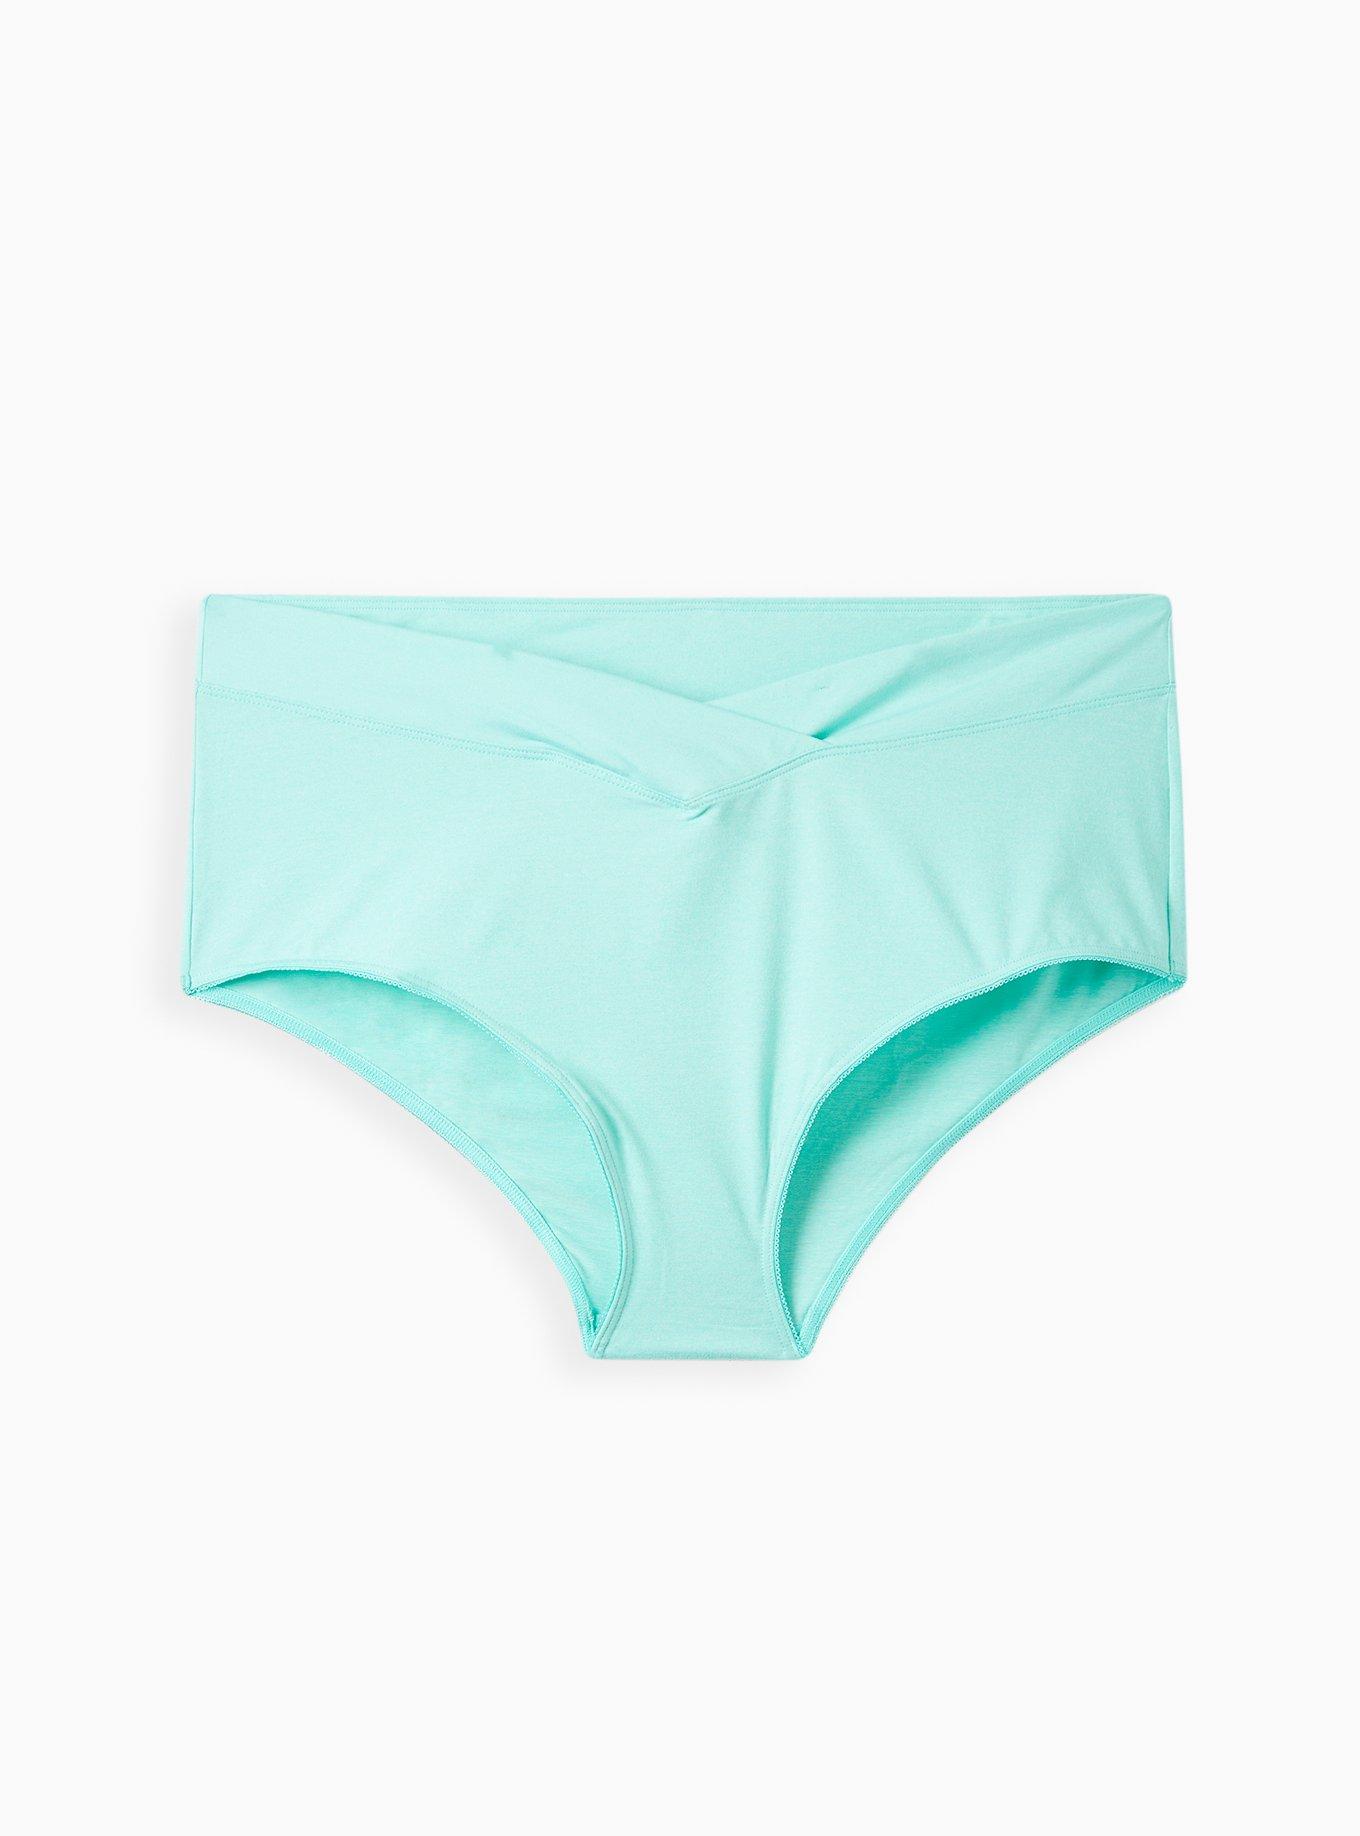 Period Panties Briefs  Machine Washable Microfiber from Japan